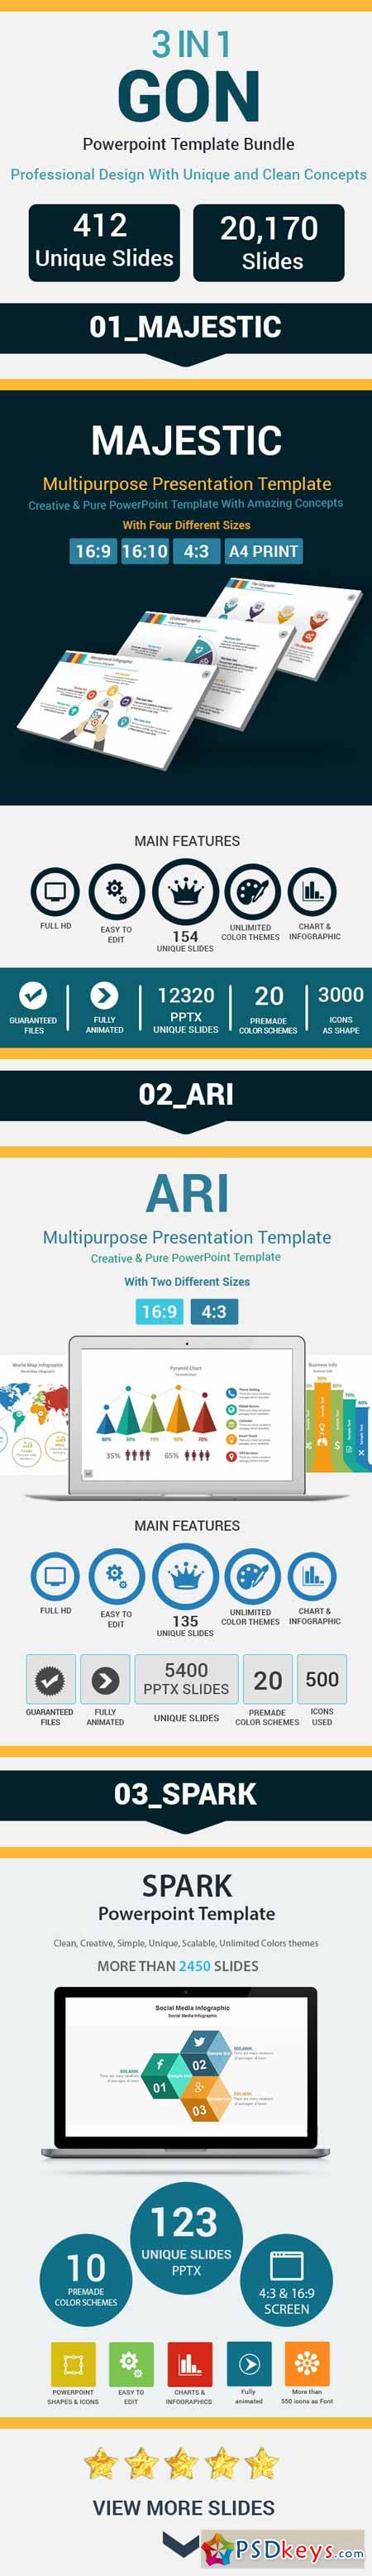 3 in 1 GON PowerPoint Template Bundle 11404039